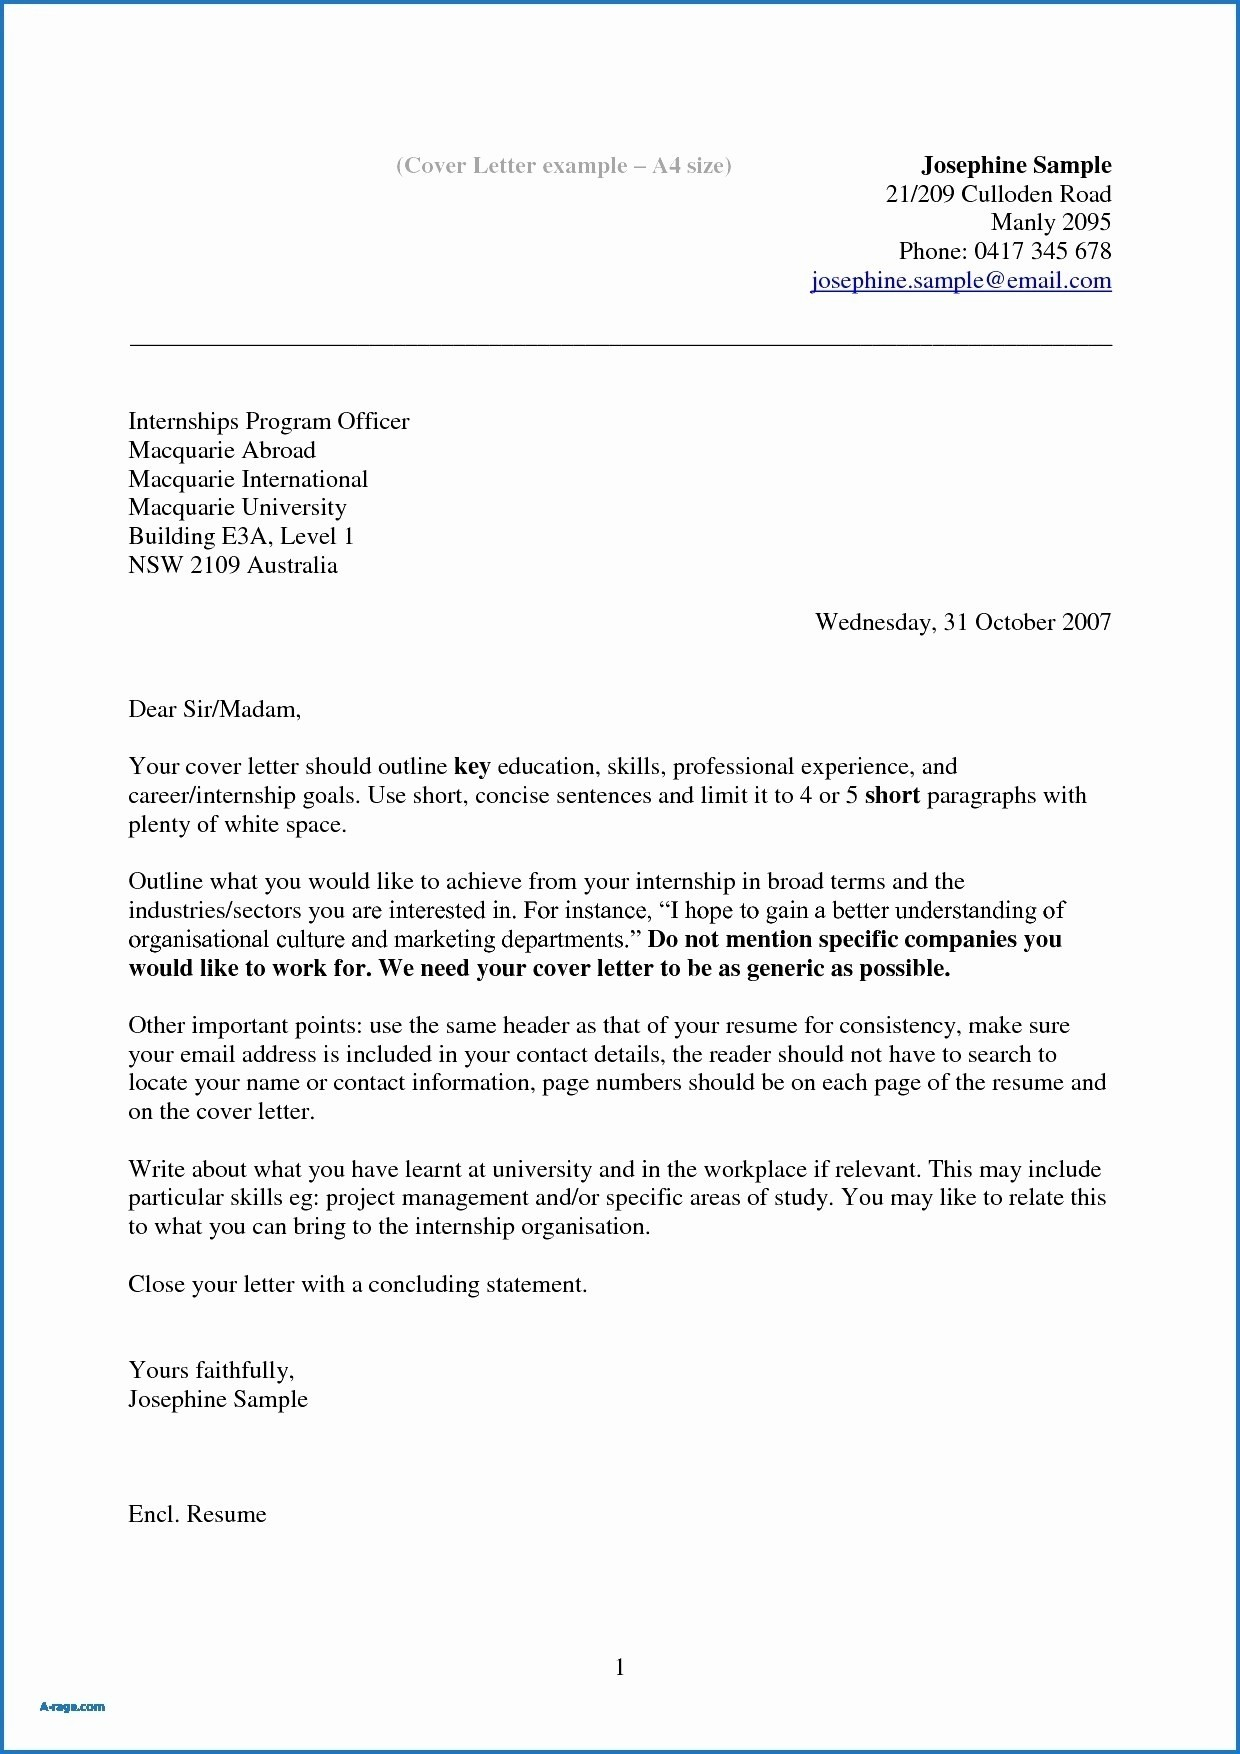 Letter to Shareholders Template - Free Internship Resume Template Beautiful Free Letter Templates for